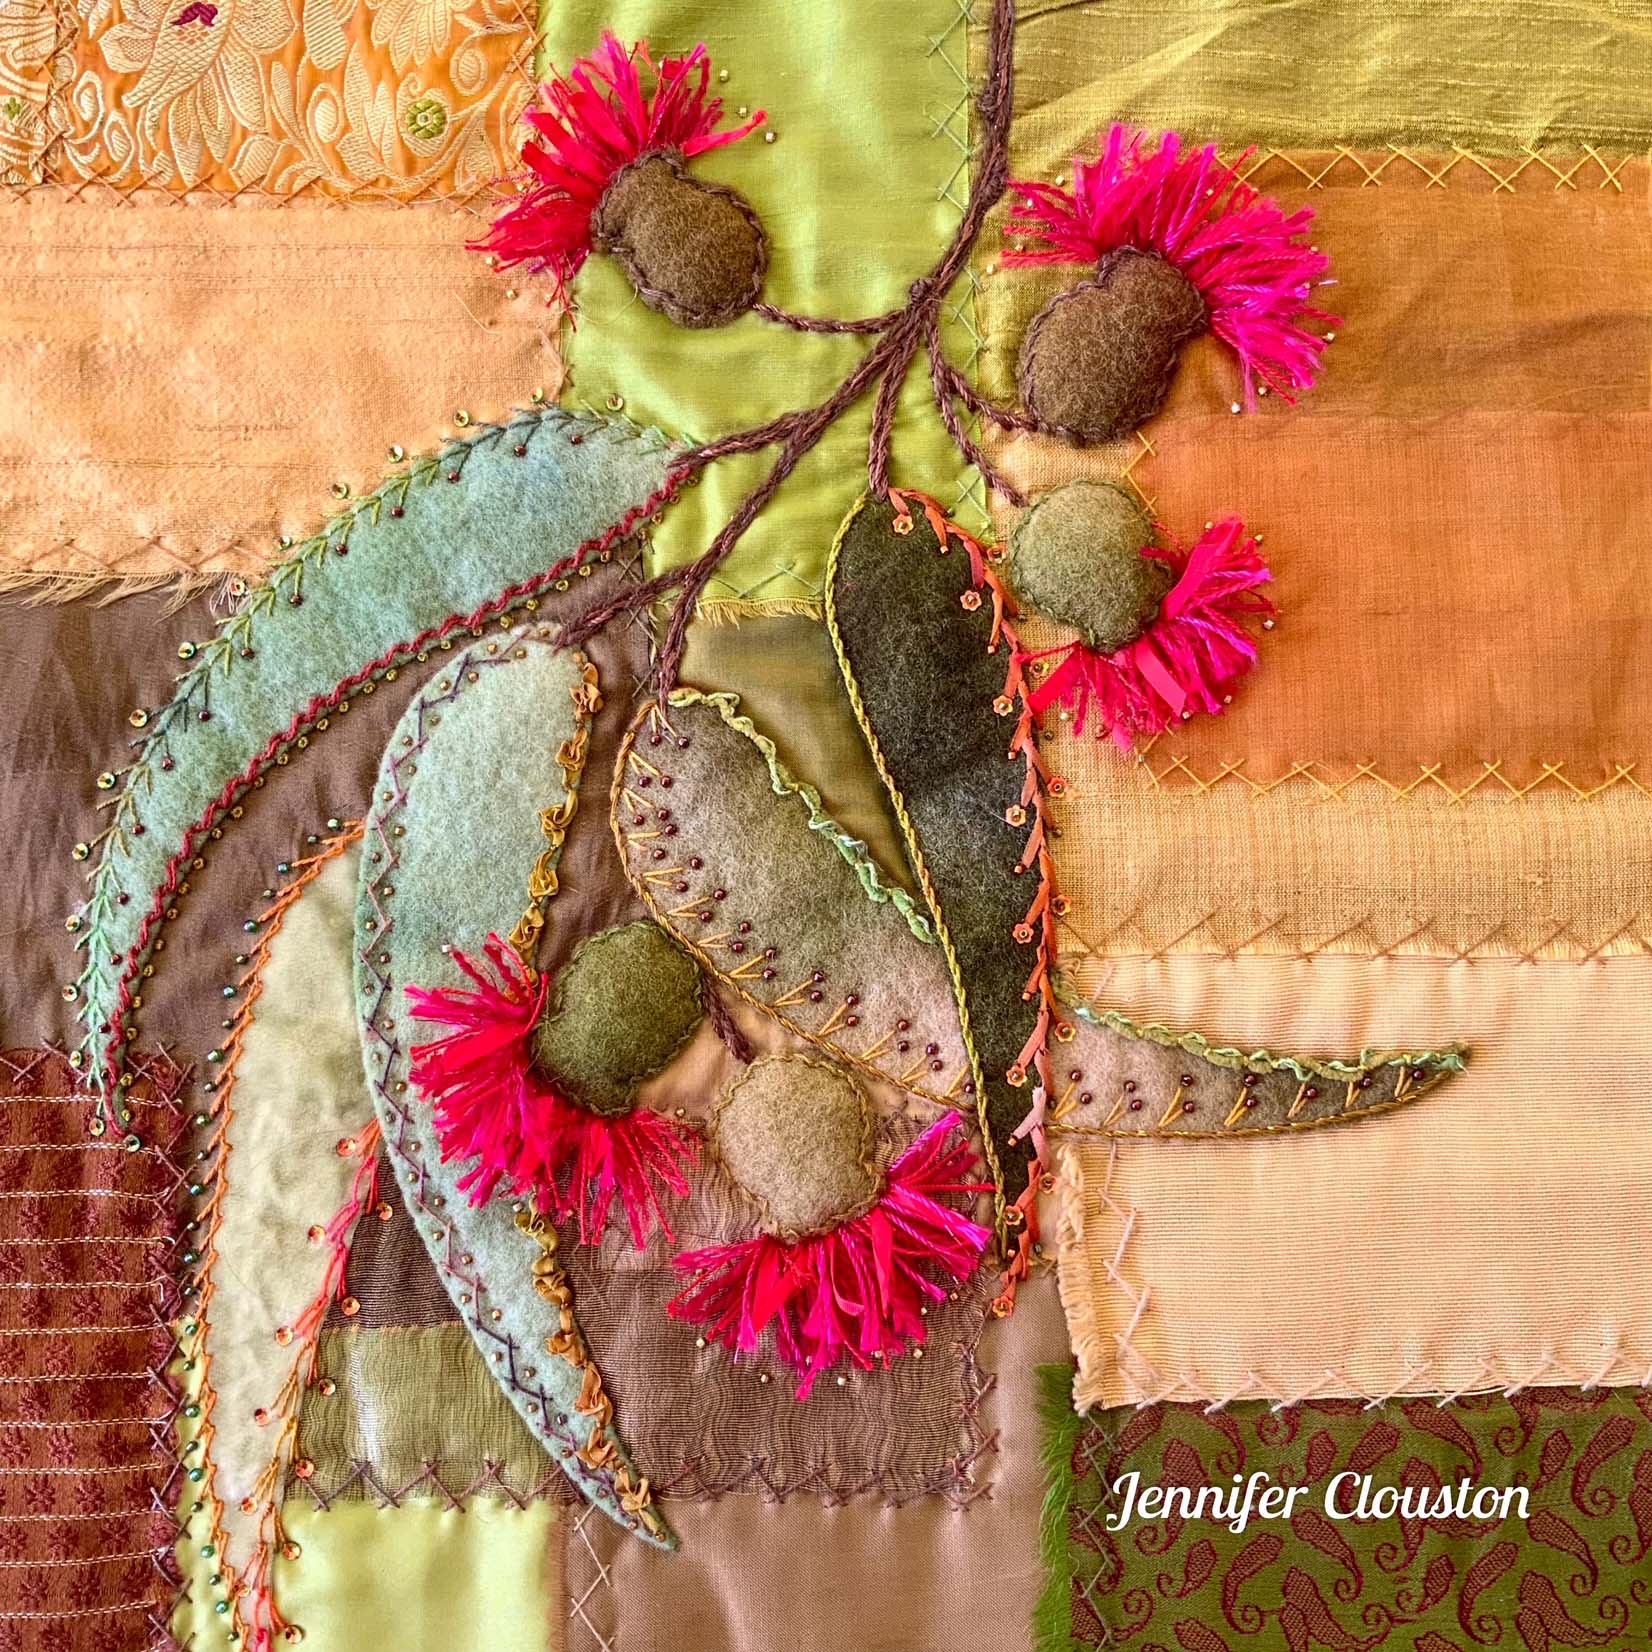 Textile Collage & Embroidery Retreat with Jennifer Coulston - May 26 - 28, 2023